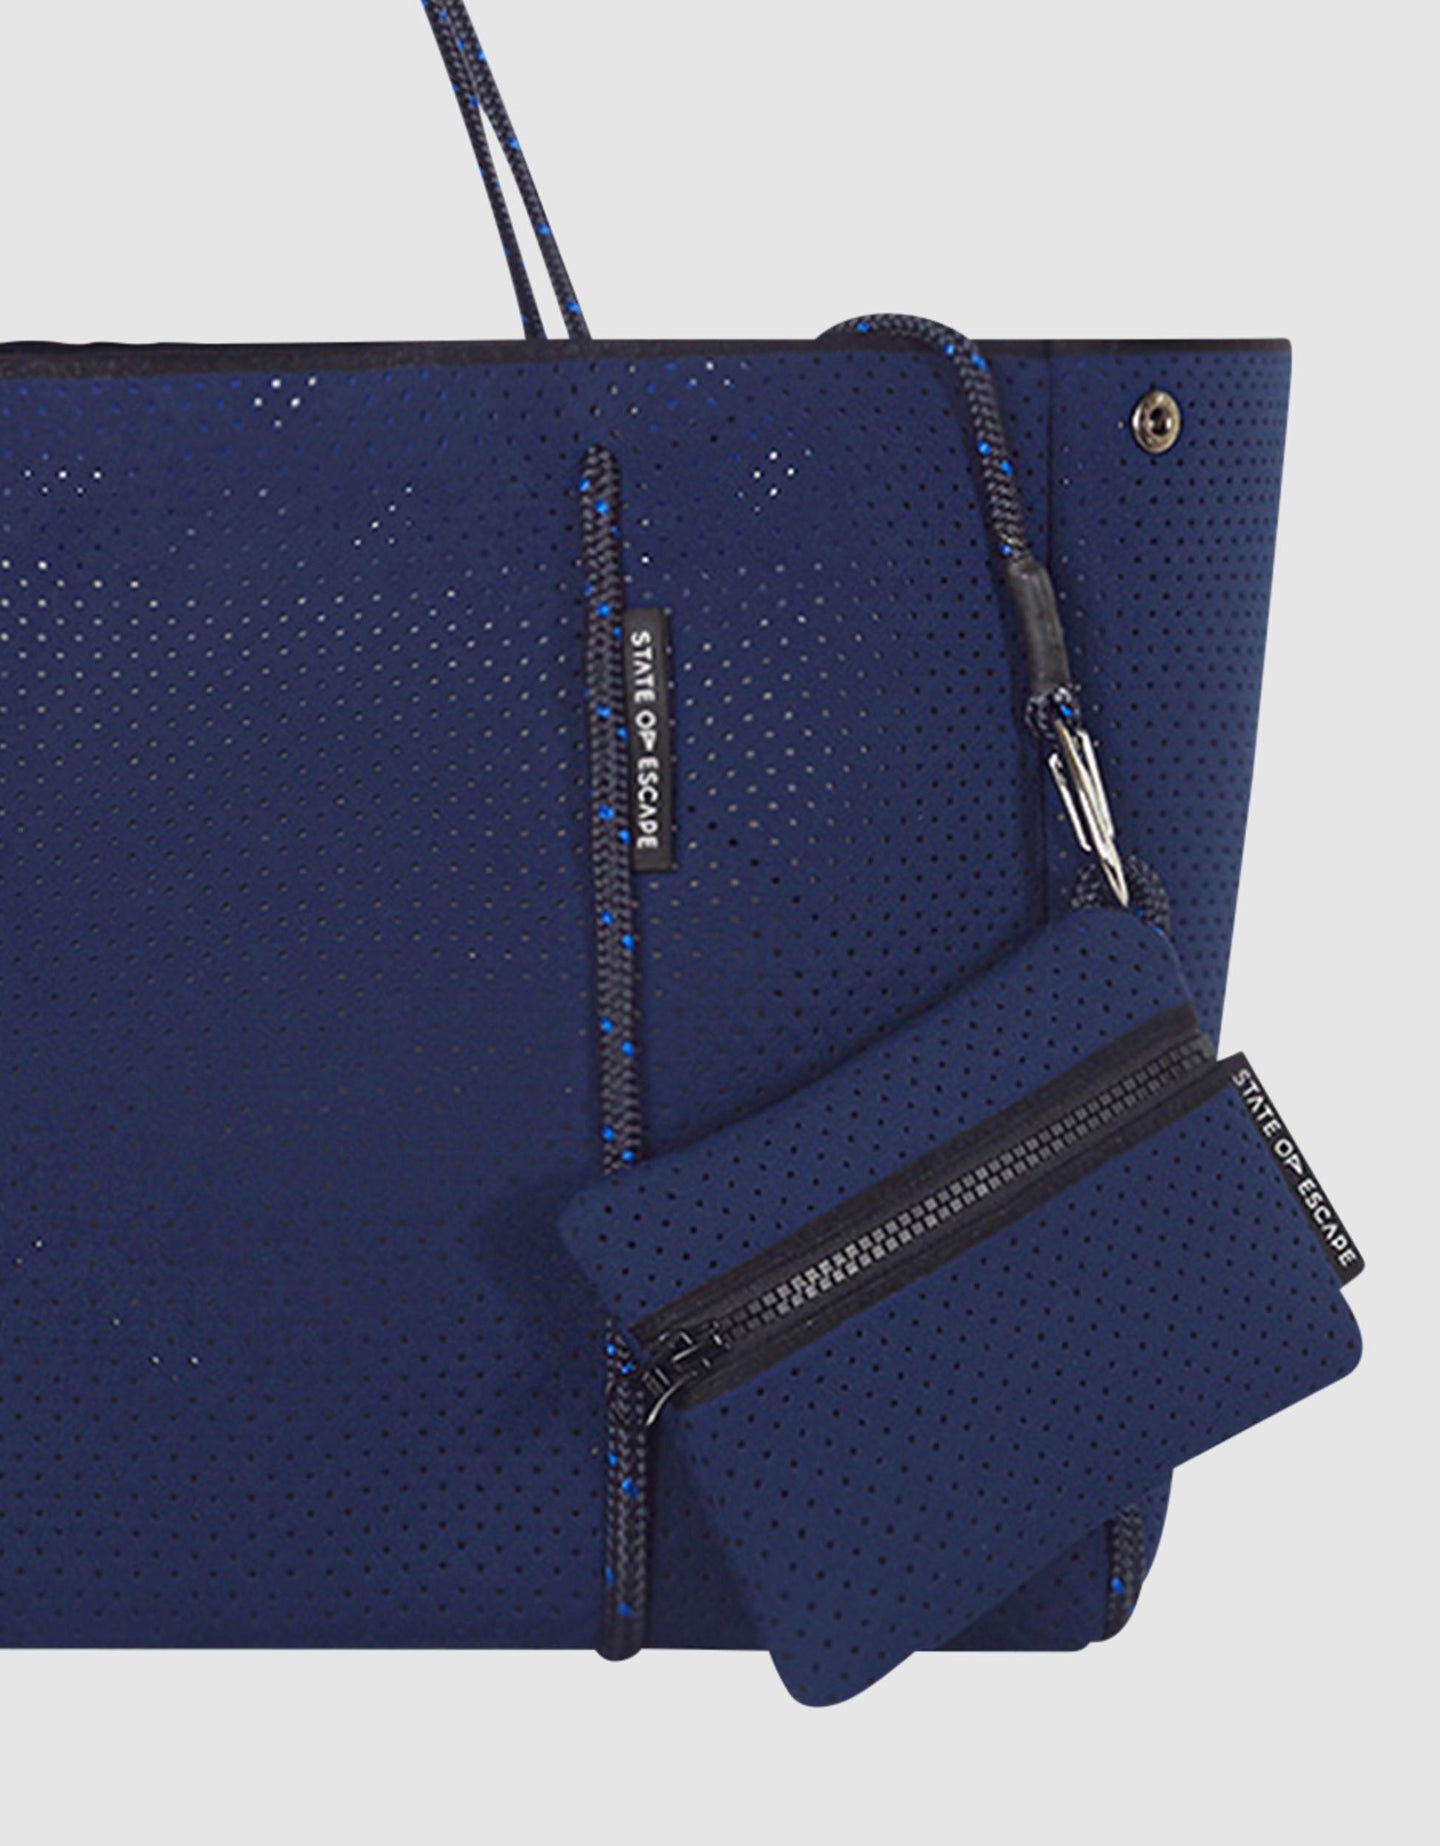 Neon Tote Bag in Navy Electric Blue – State of Escape